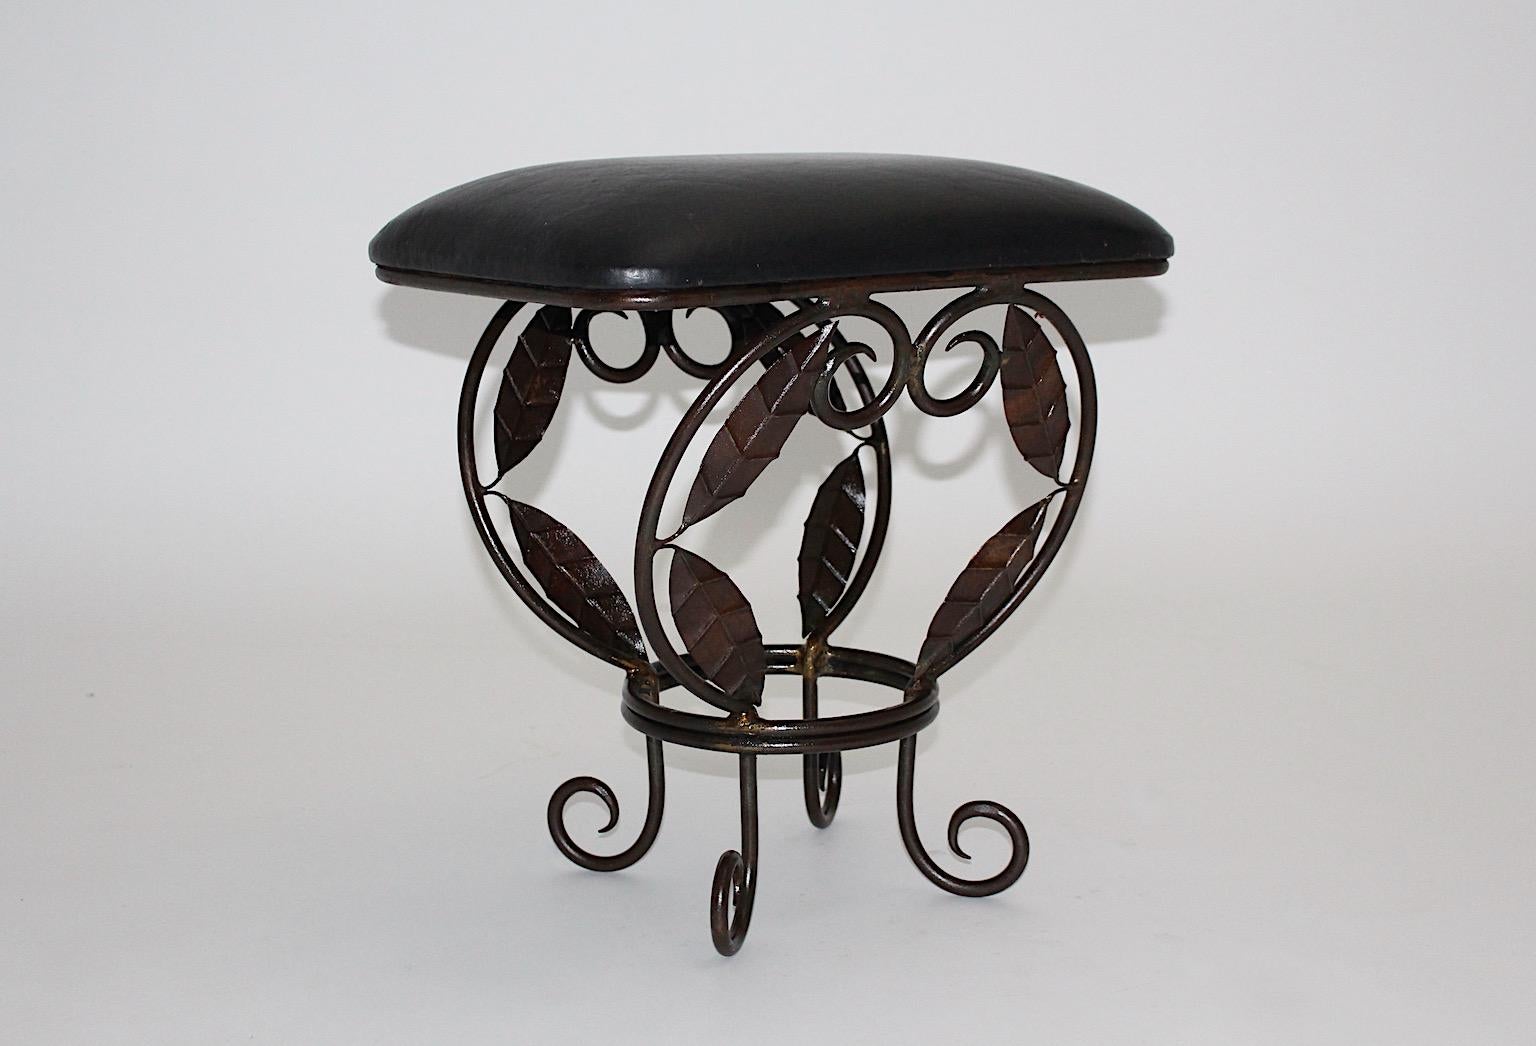 Vintage Brown Metal Stool Ottoman with Leaves Black Leather Seat, 1970s, France For Sale 1